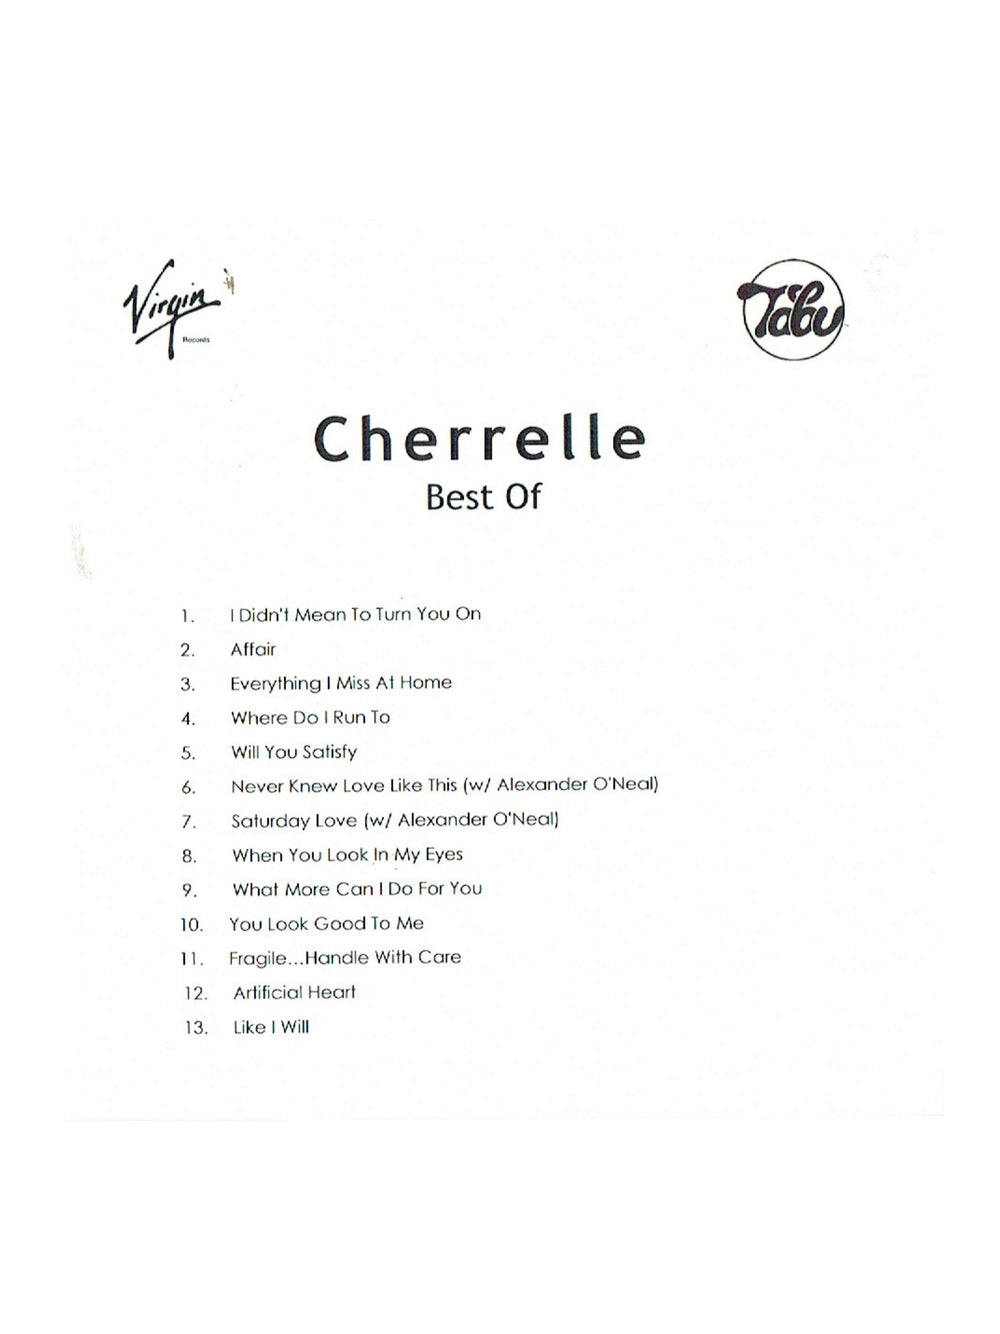 Prince – Cherrelle The Best Of Promotional CD Album Release 1995 Prince